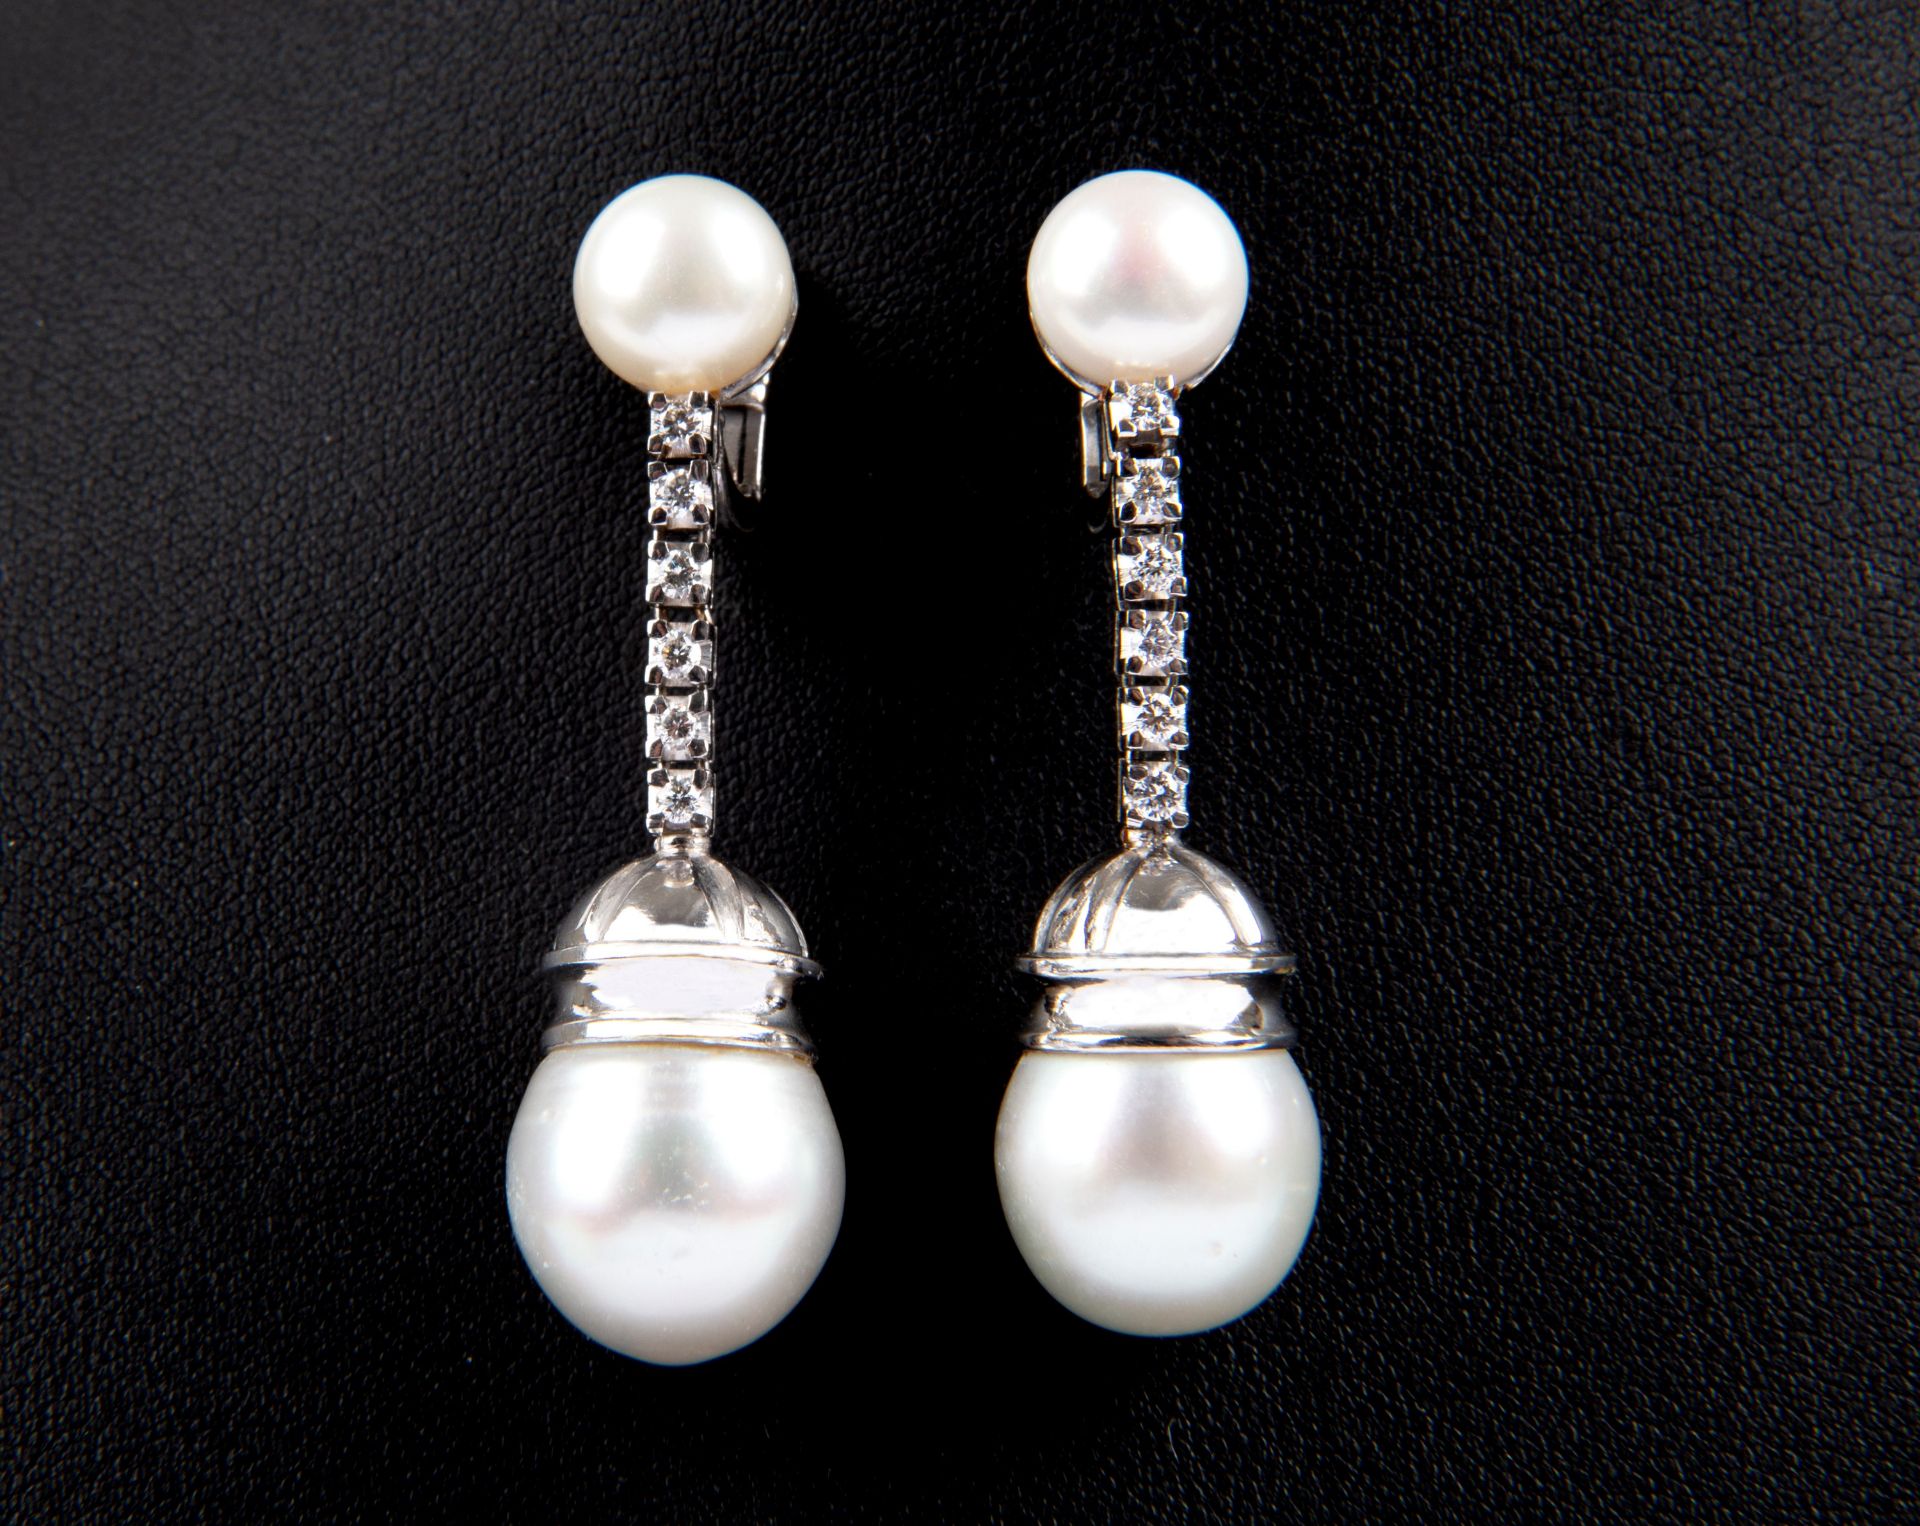 Earrings in gold and South Sea pearls